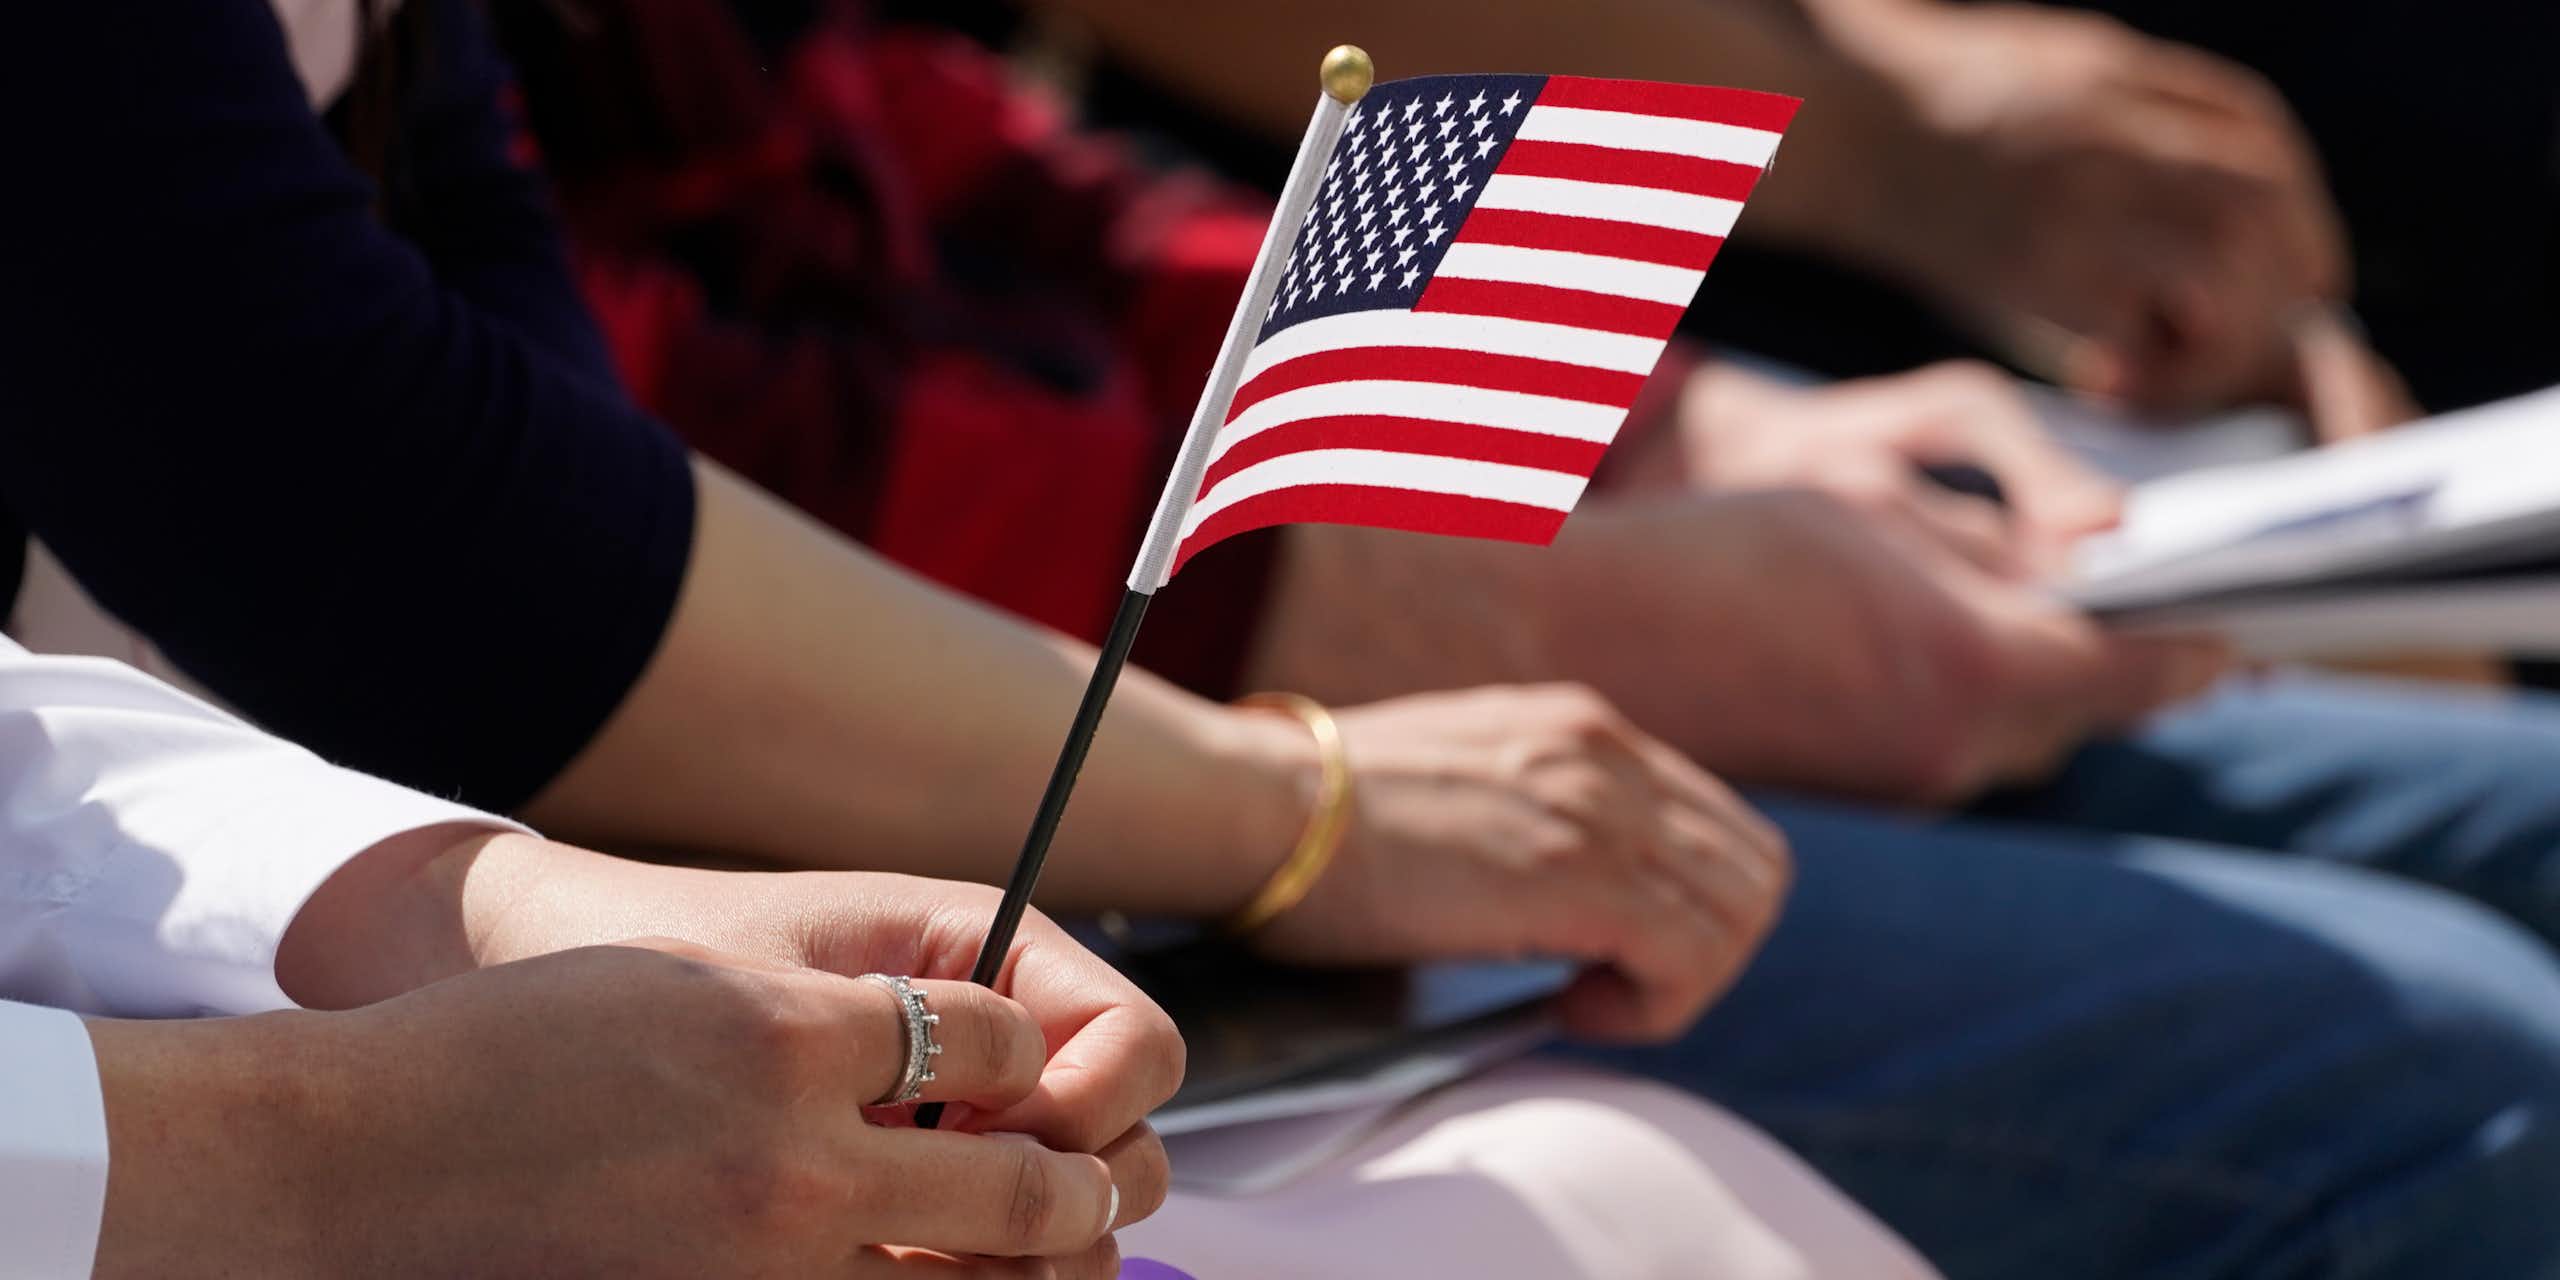 Close up of a hand holding a small American flag